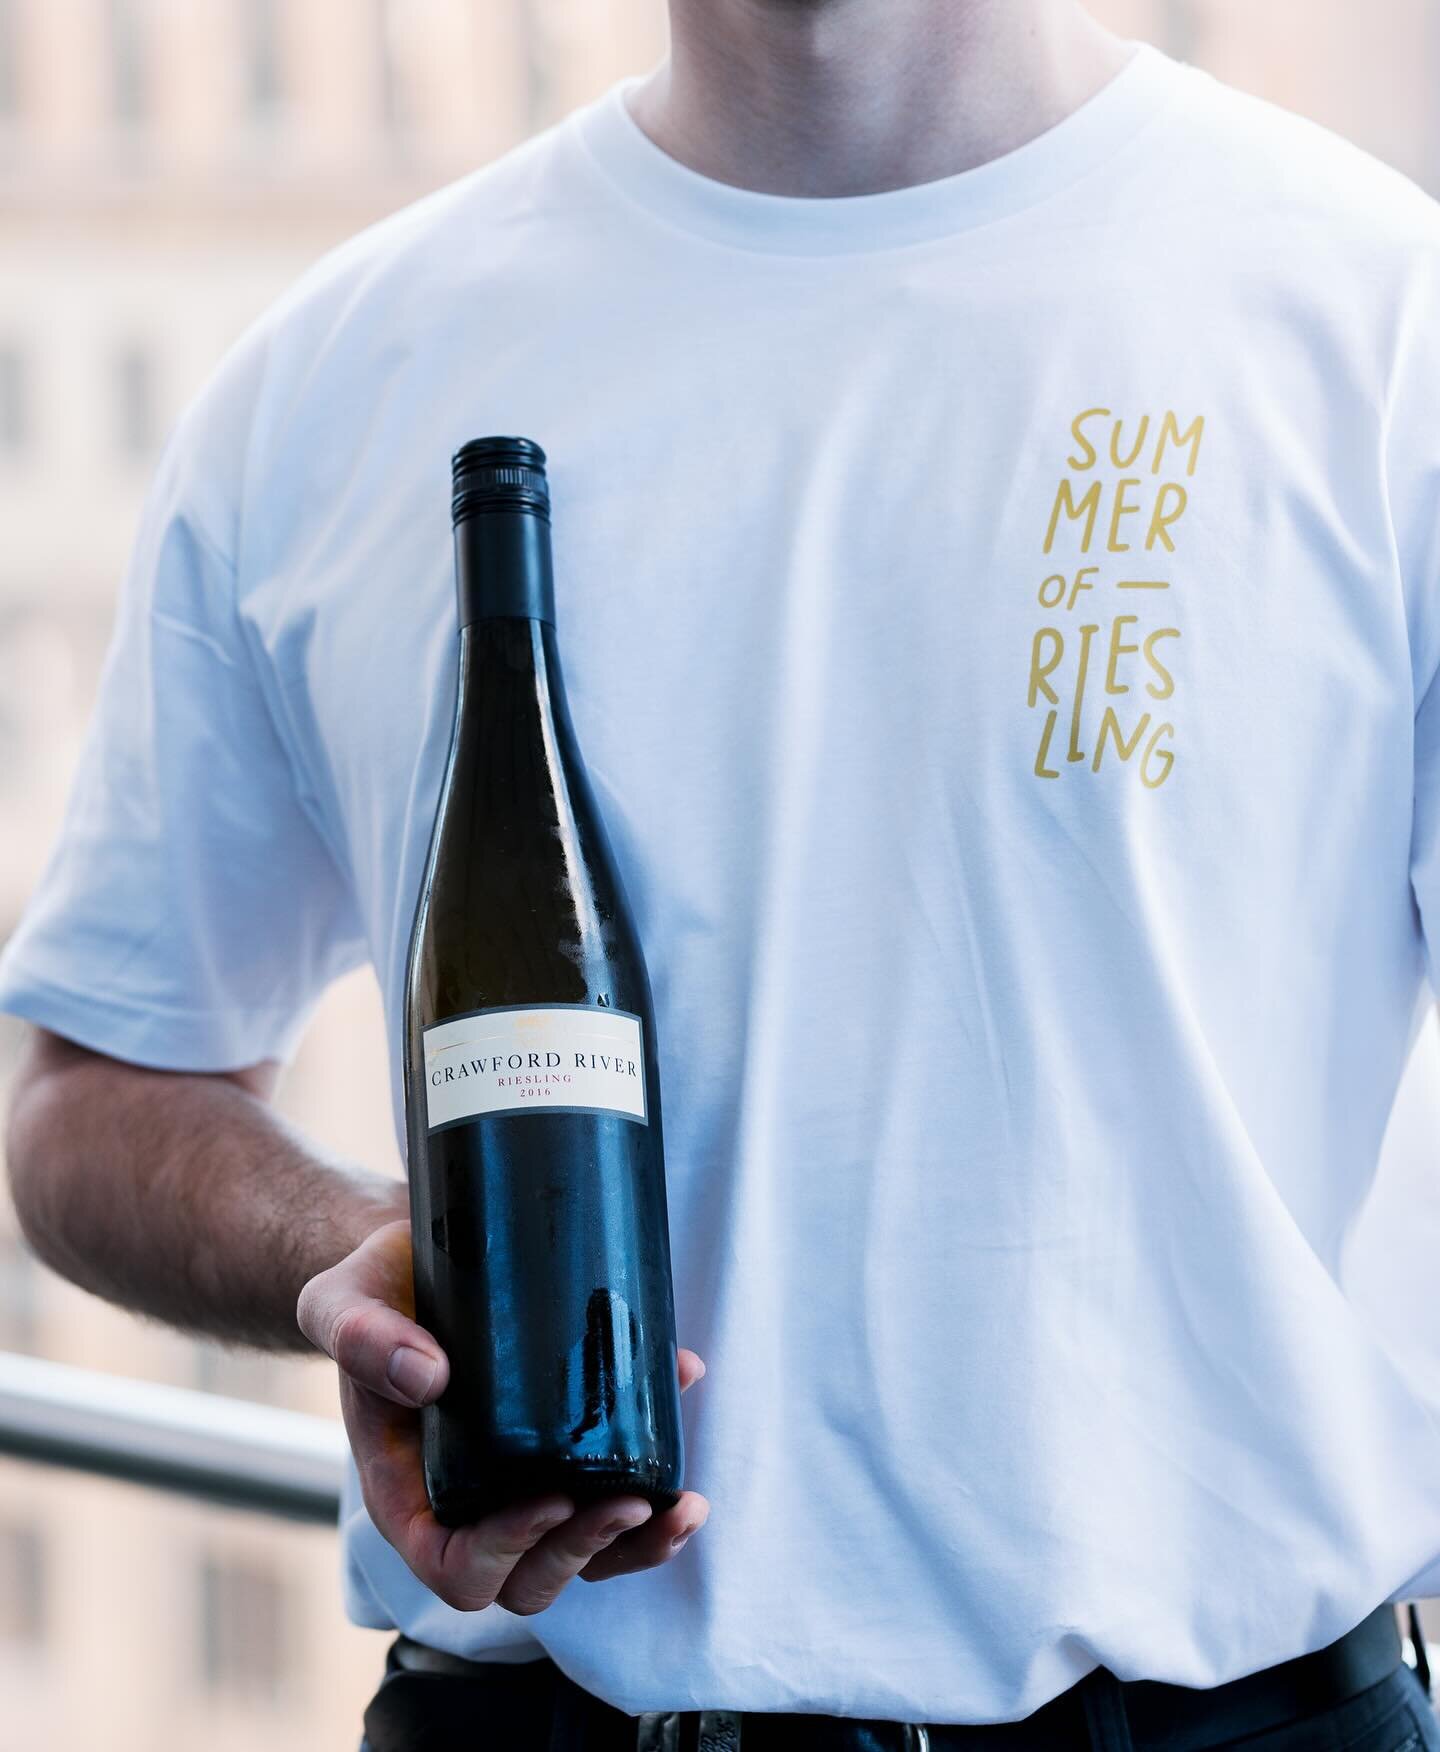 @2kwbar is here to bring in a &lsquo;Summer of Riesling&rsquo; celebration that promises to elevate your wine experience.

Design ~ @fl.o.at
Creative Direction ~ @studiomaja_
Photography ~ @sassafraspr